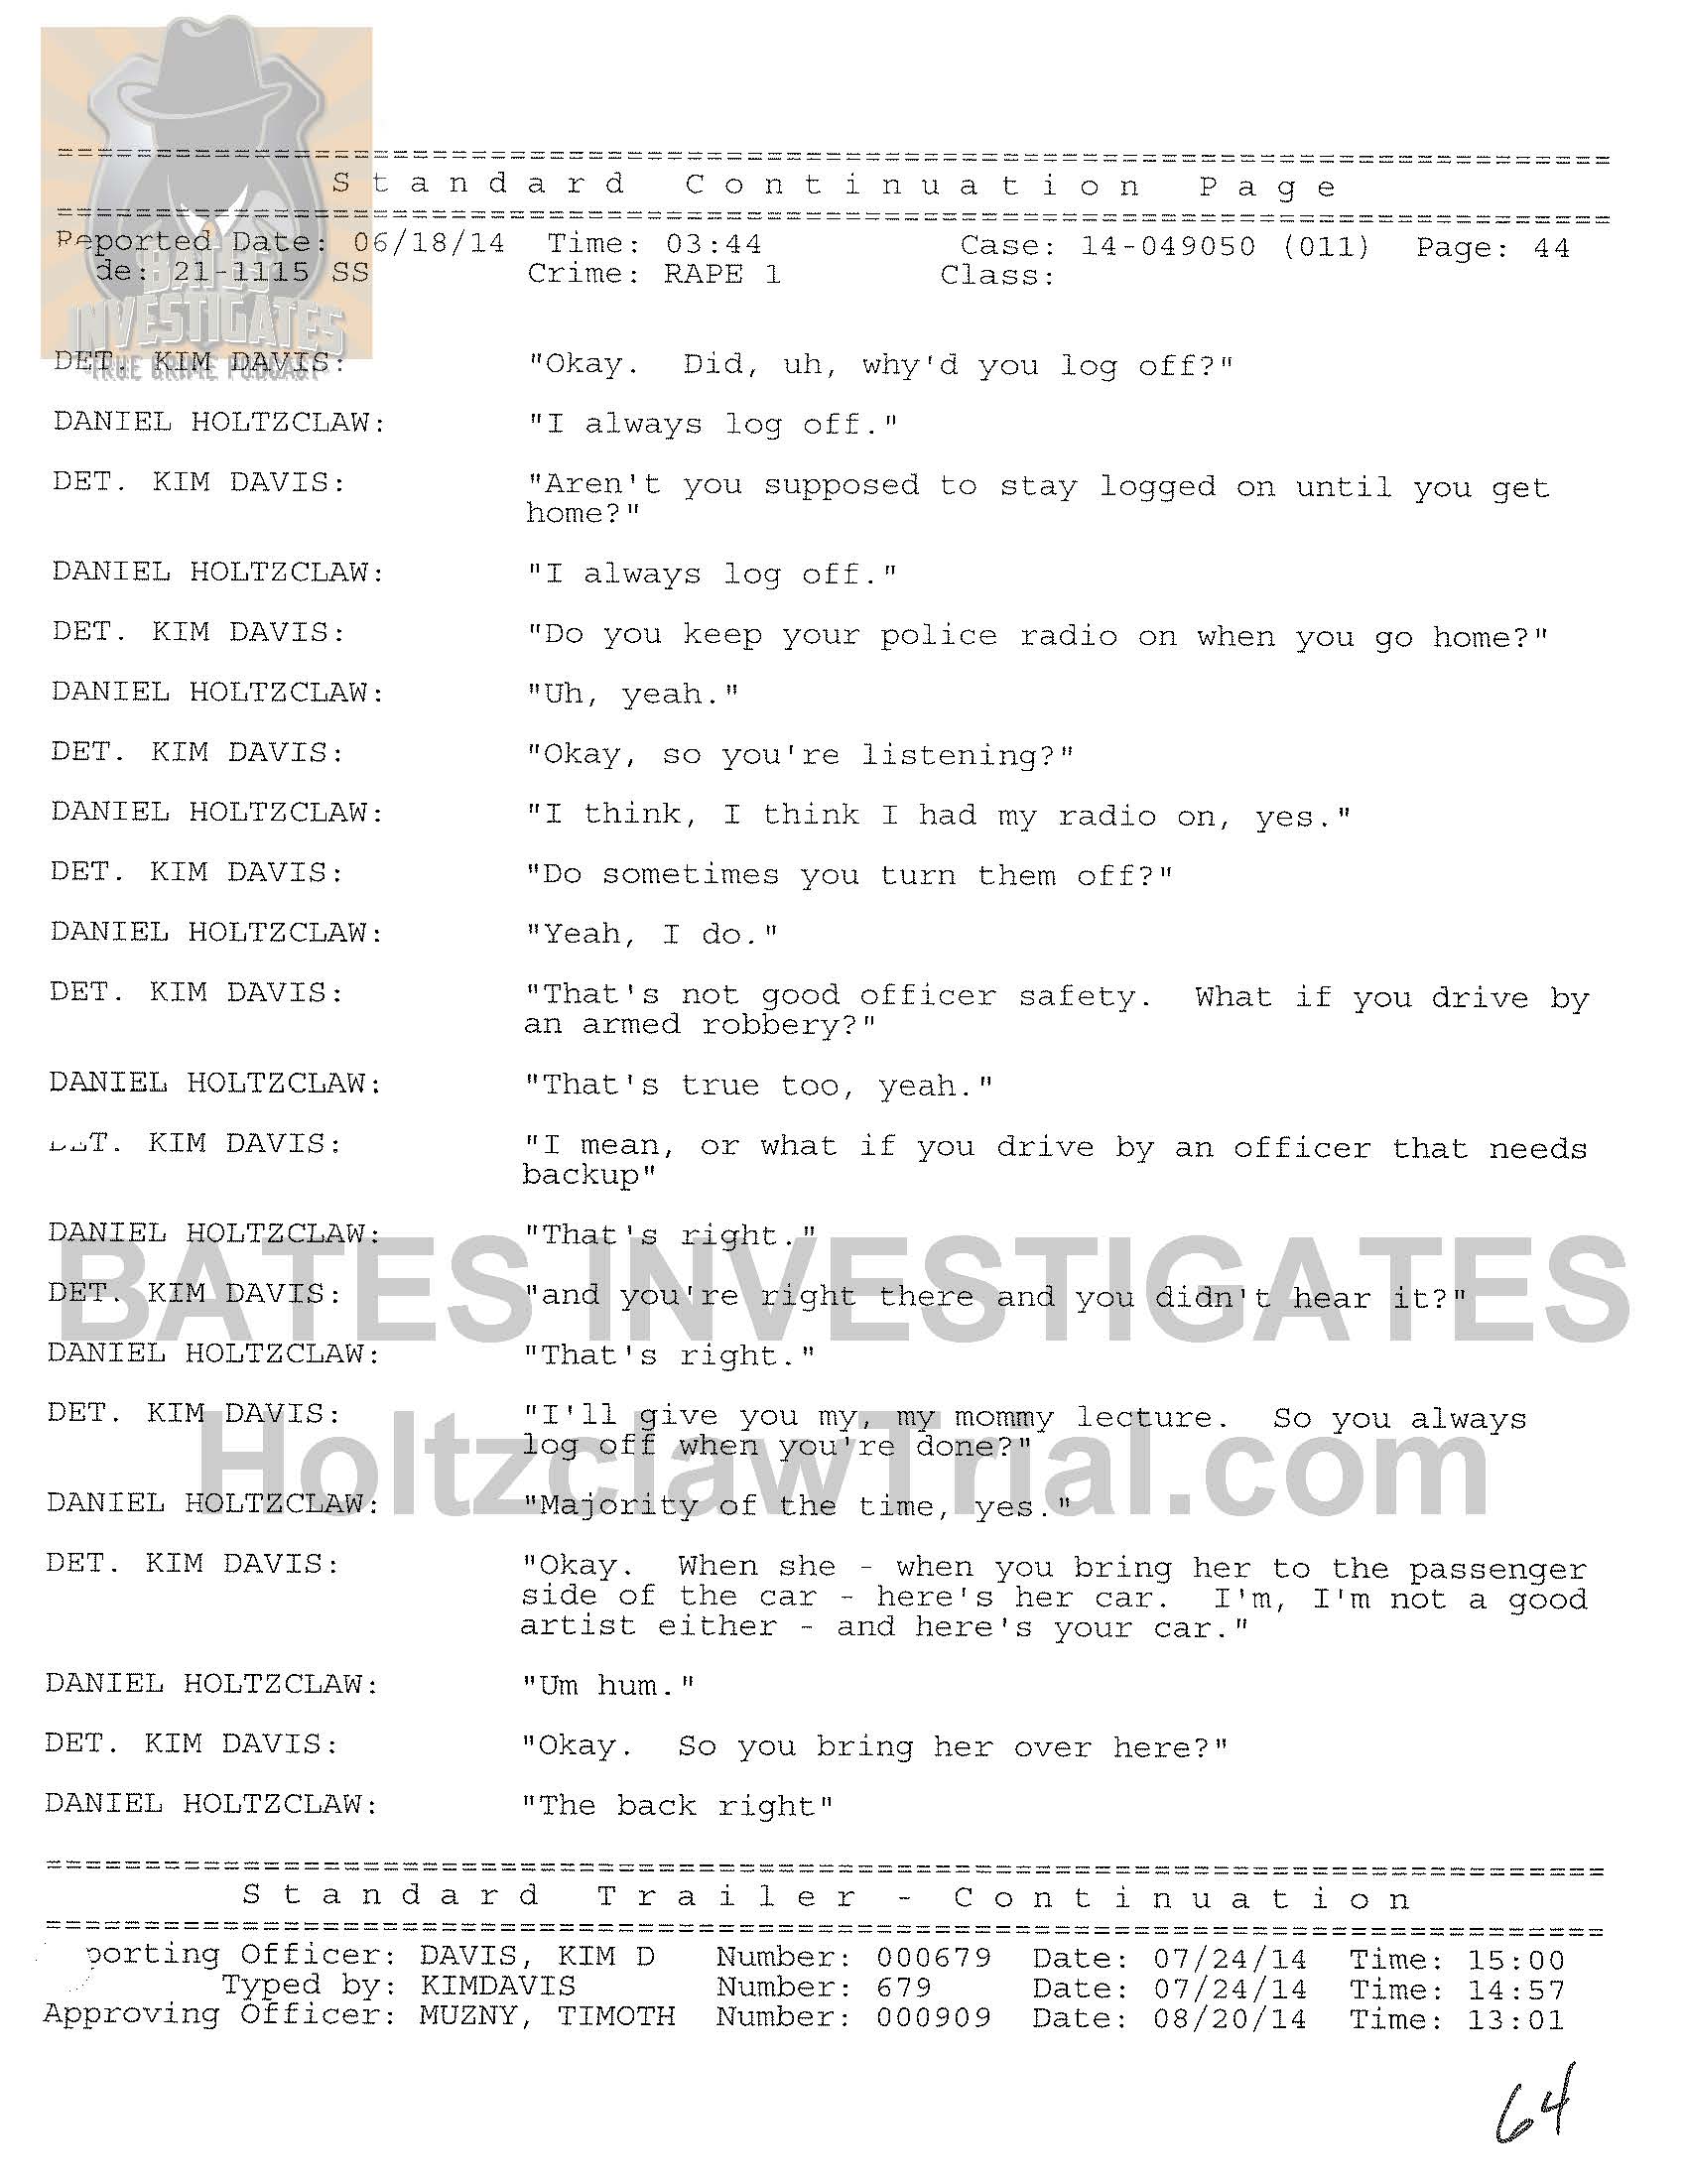 Holtzclaw Interrogation Transcript - Ep02 Redacted_Page_44.jpg